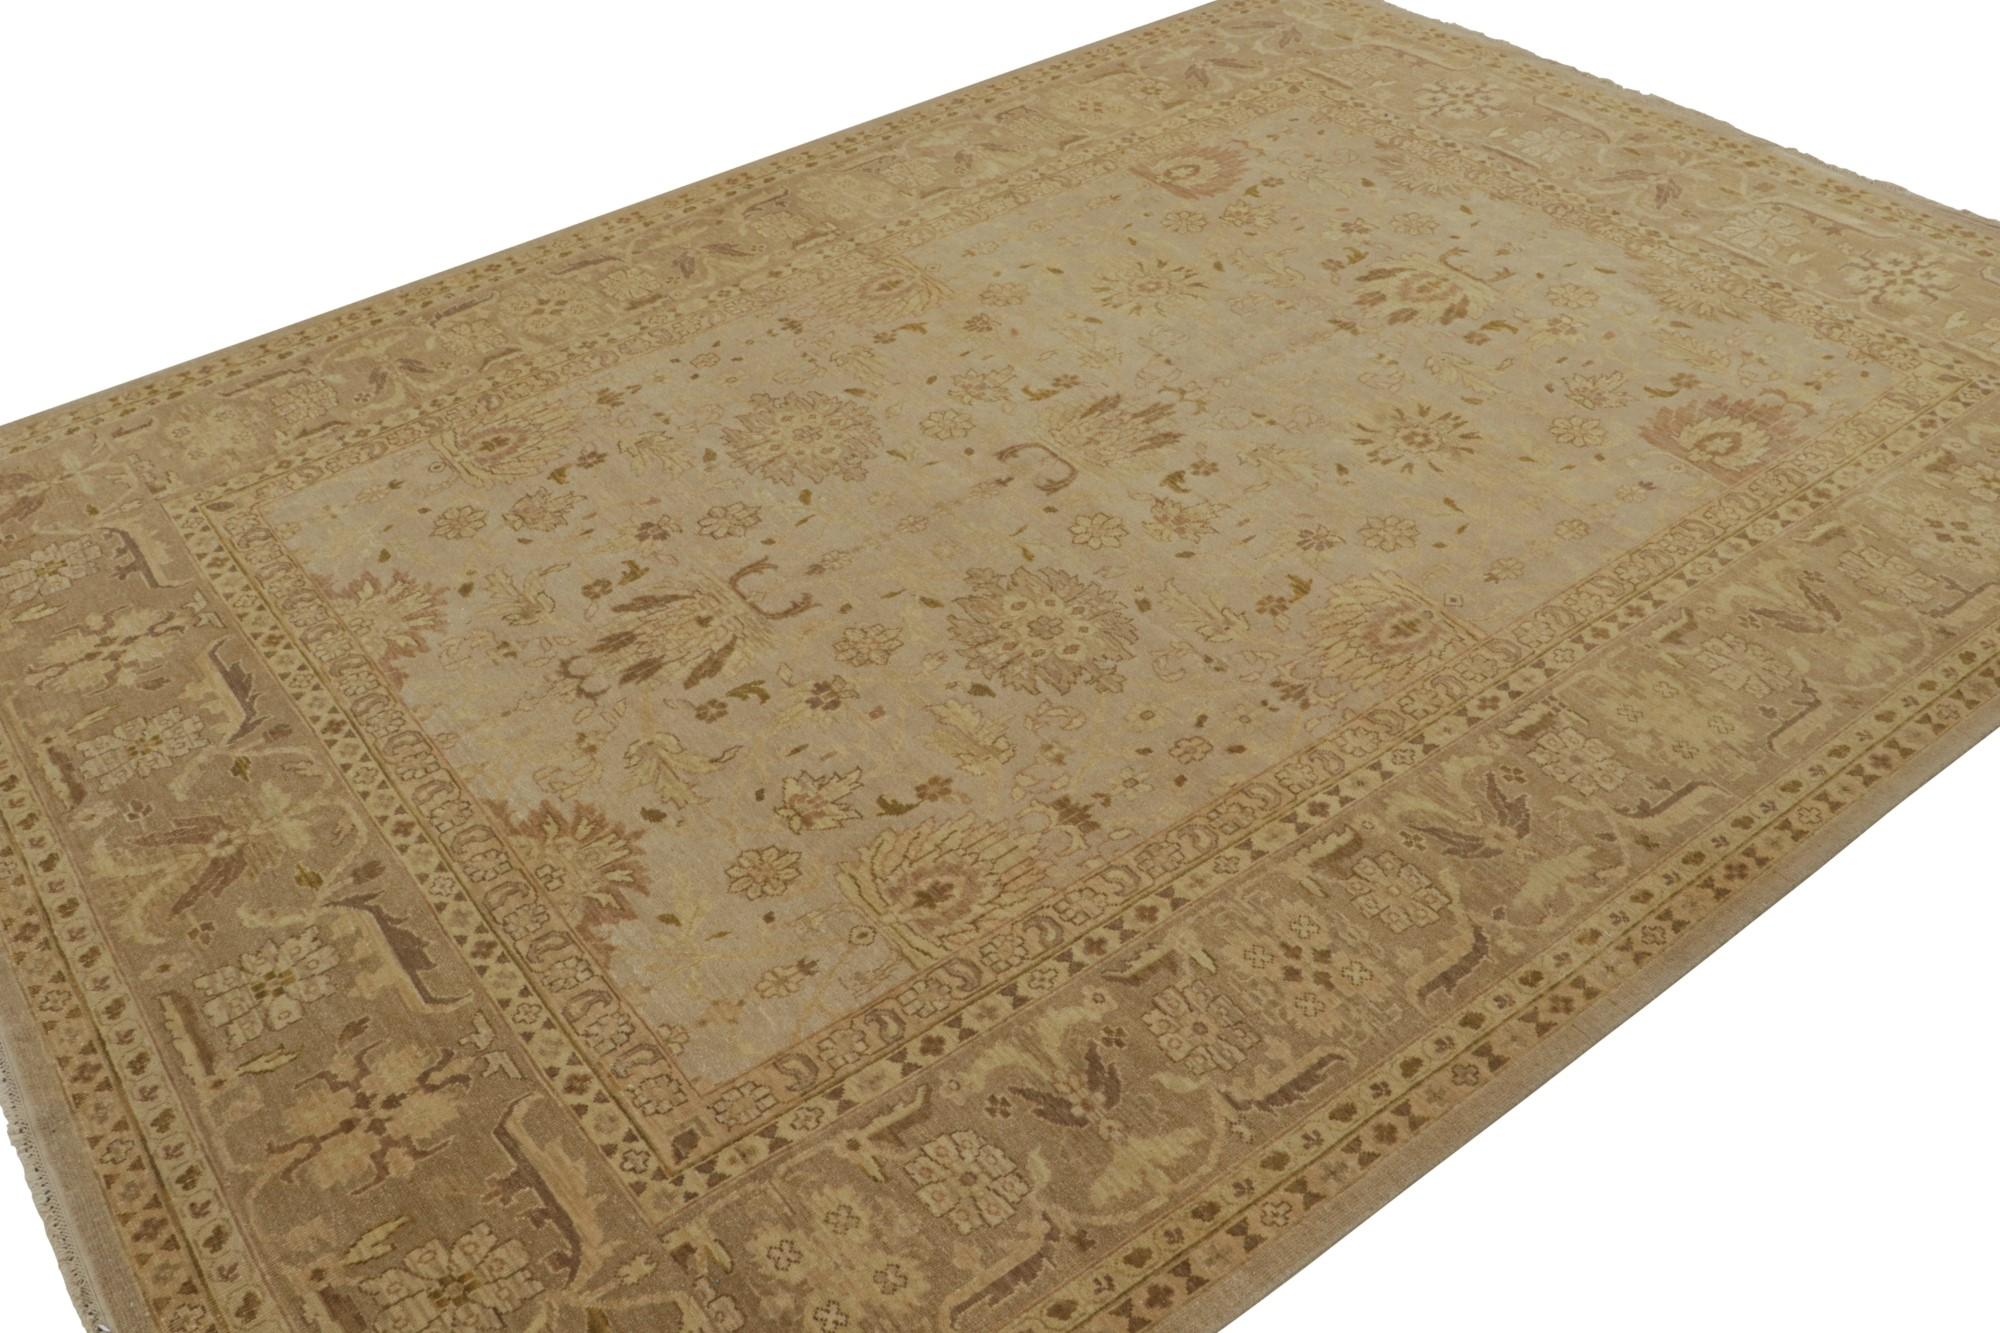 Hand-knotted in wool, this 9x11 rug has been inspired by Persian Mahal rugs. In beige/brown with taupe and gold notes, and subtle pink accents in floral patterns, it is a nod to a time-honored weaving tradition with limitless modern design